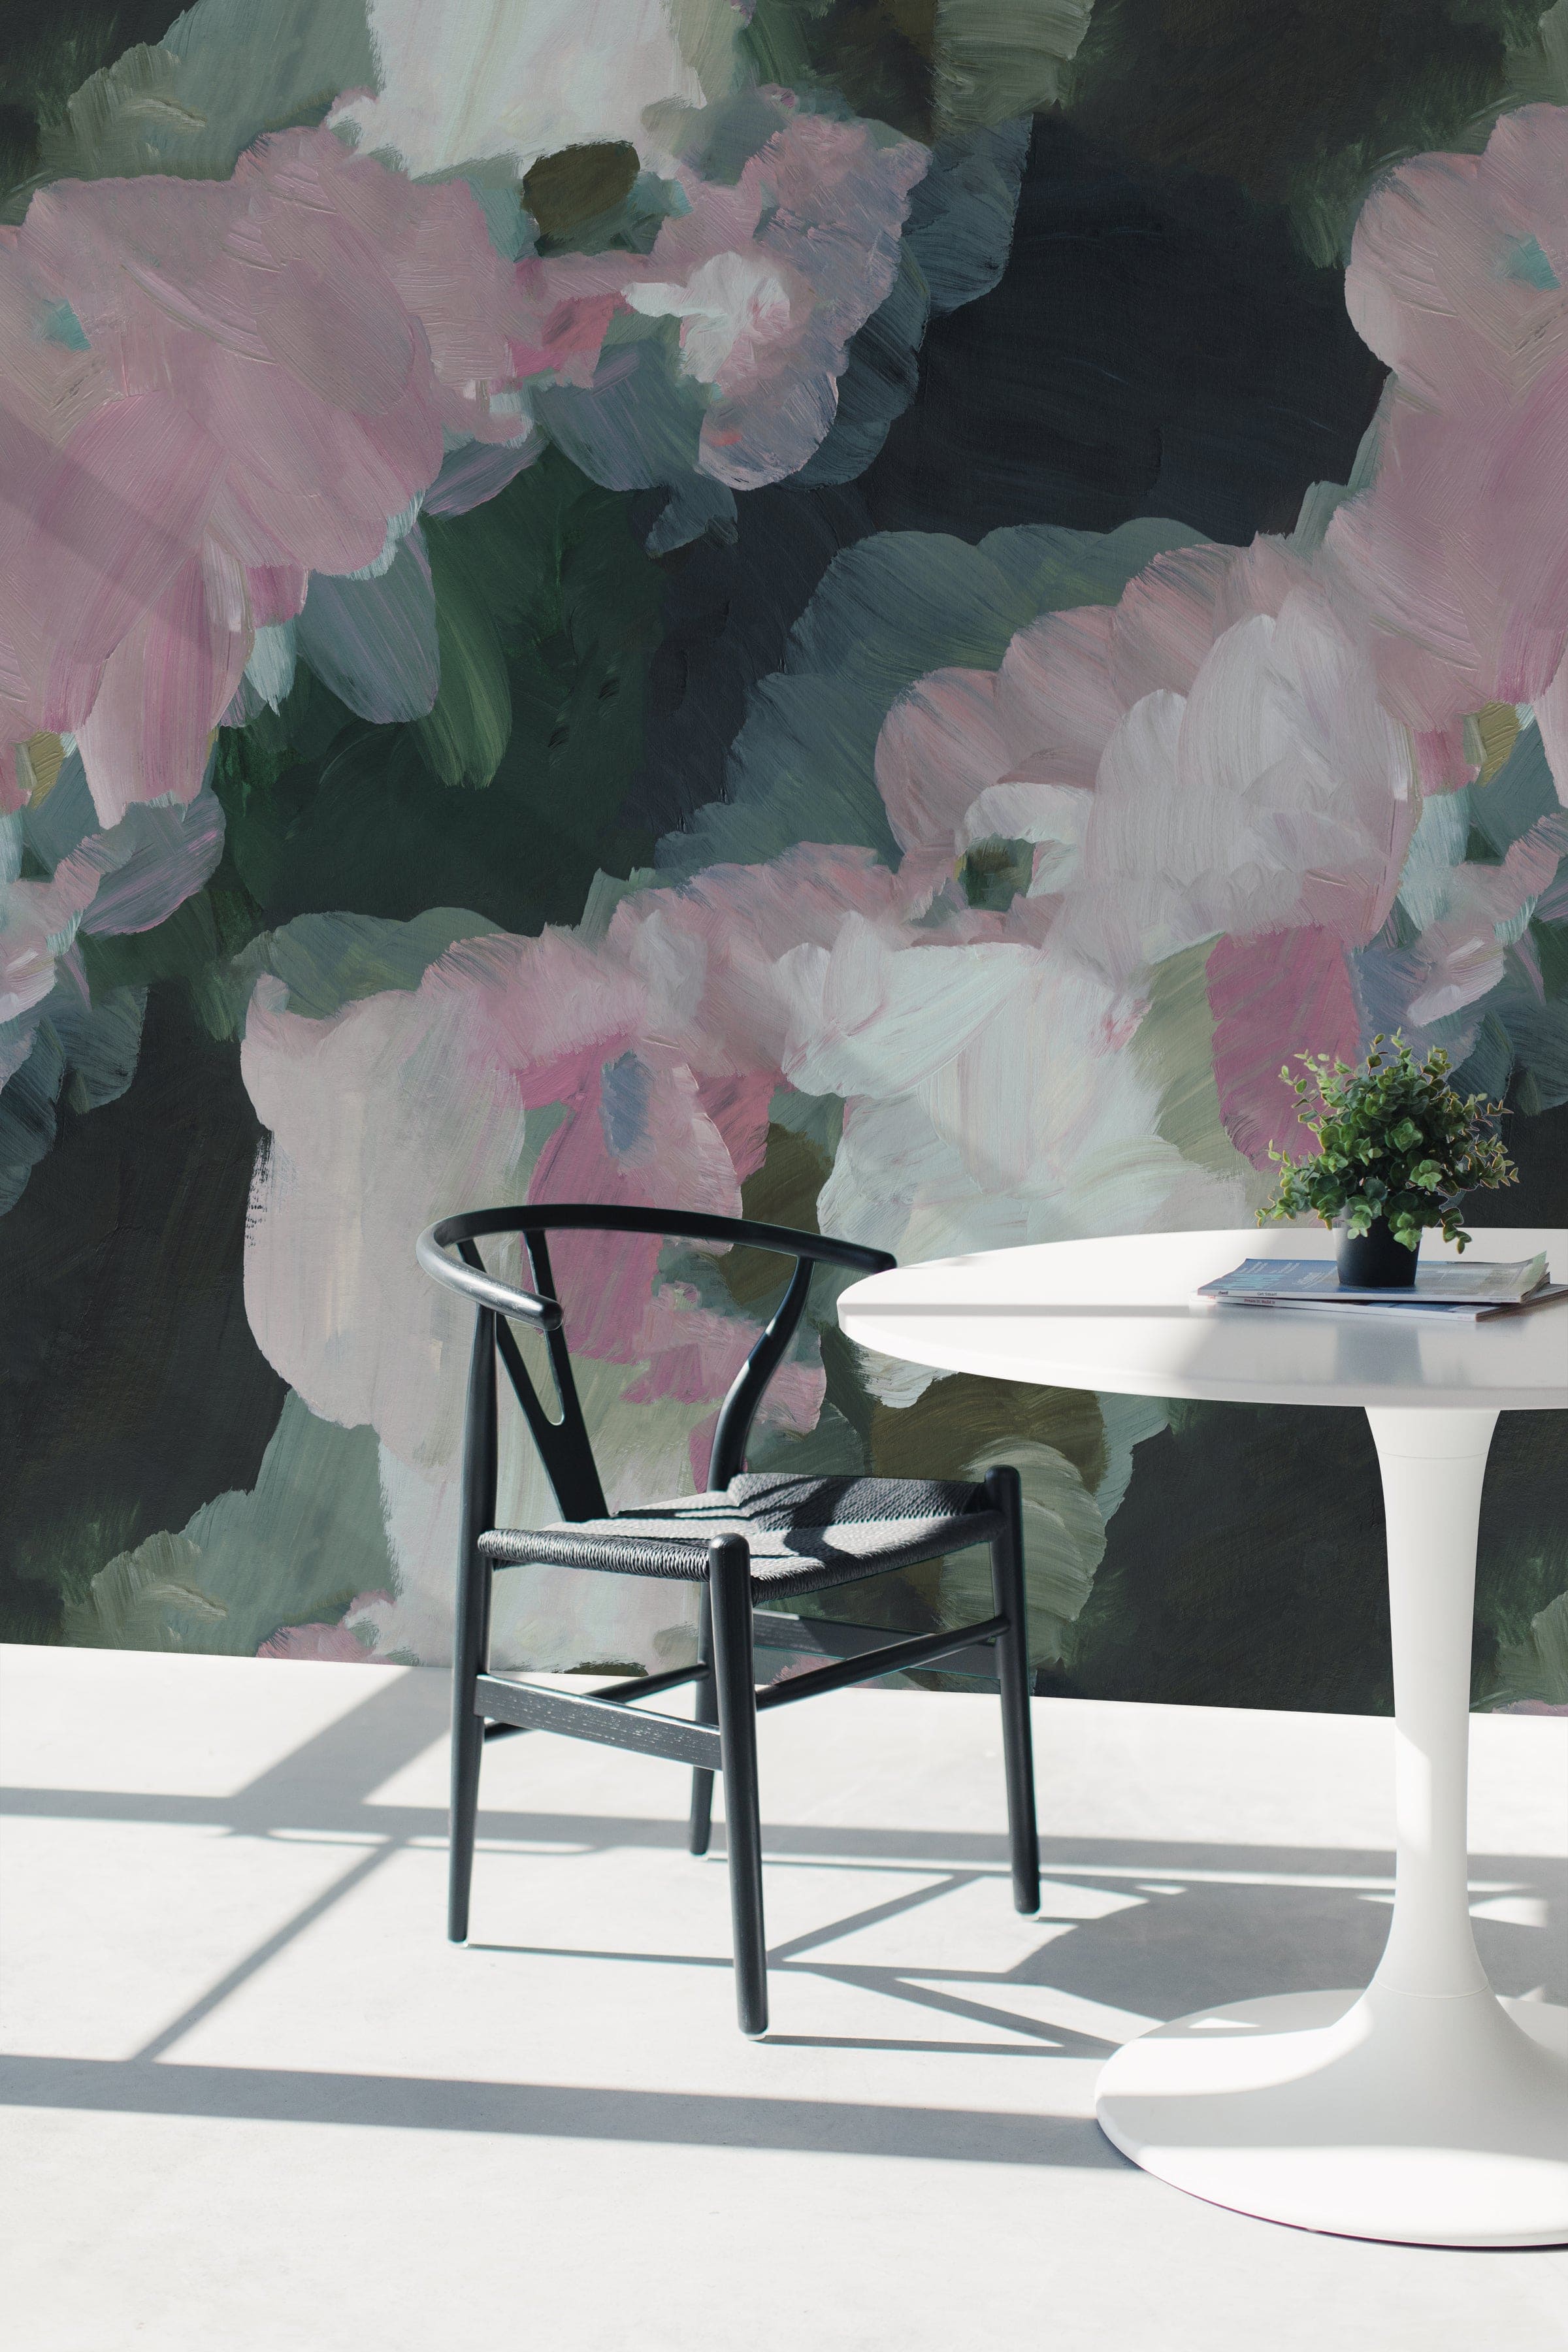 A modern room setting enhanced by the Brushed Harmony Wallpaper, showing a spacious area with a minimalist white table and a contemporary black chair. The wallpaper's abstract floral pattern in soft pinks and greens adds a touch of artistic flair to the decor.